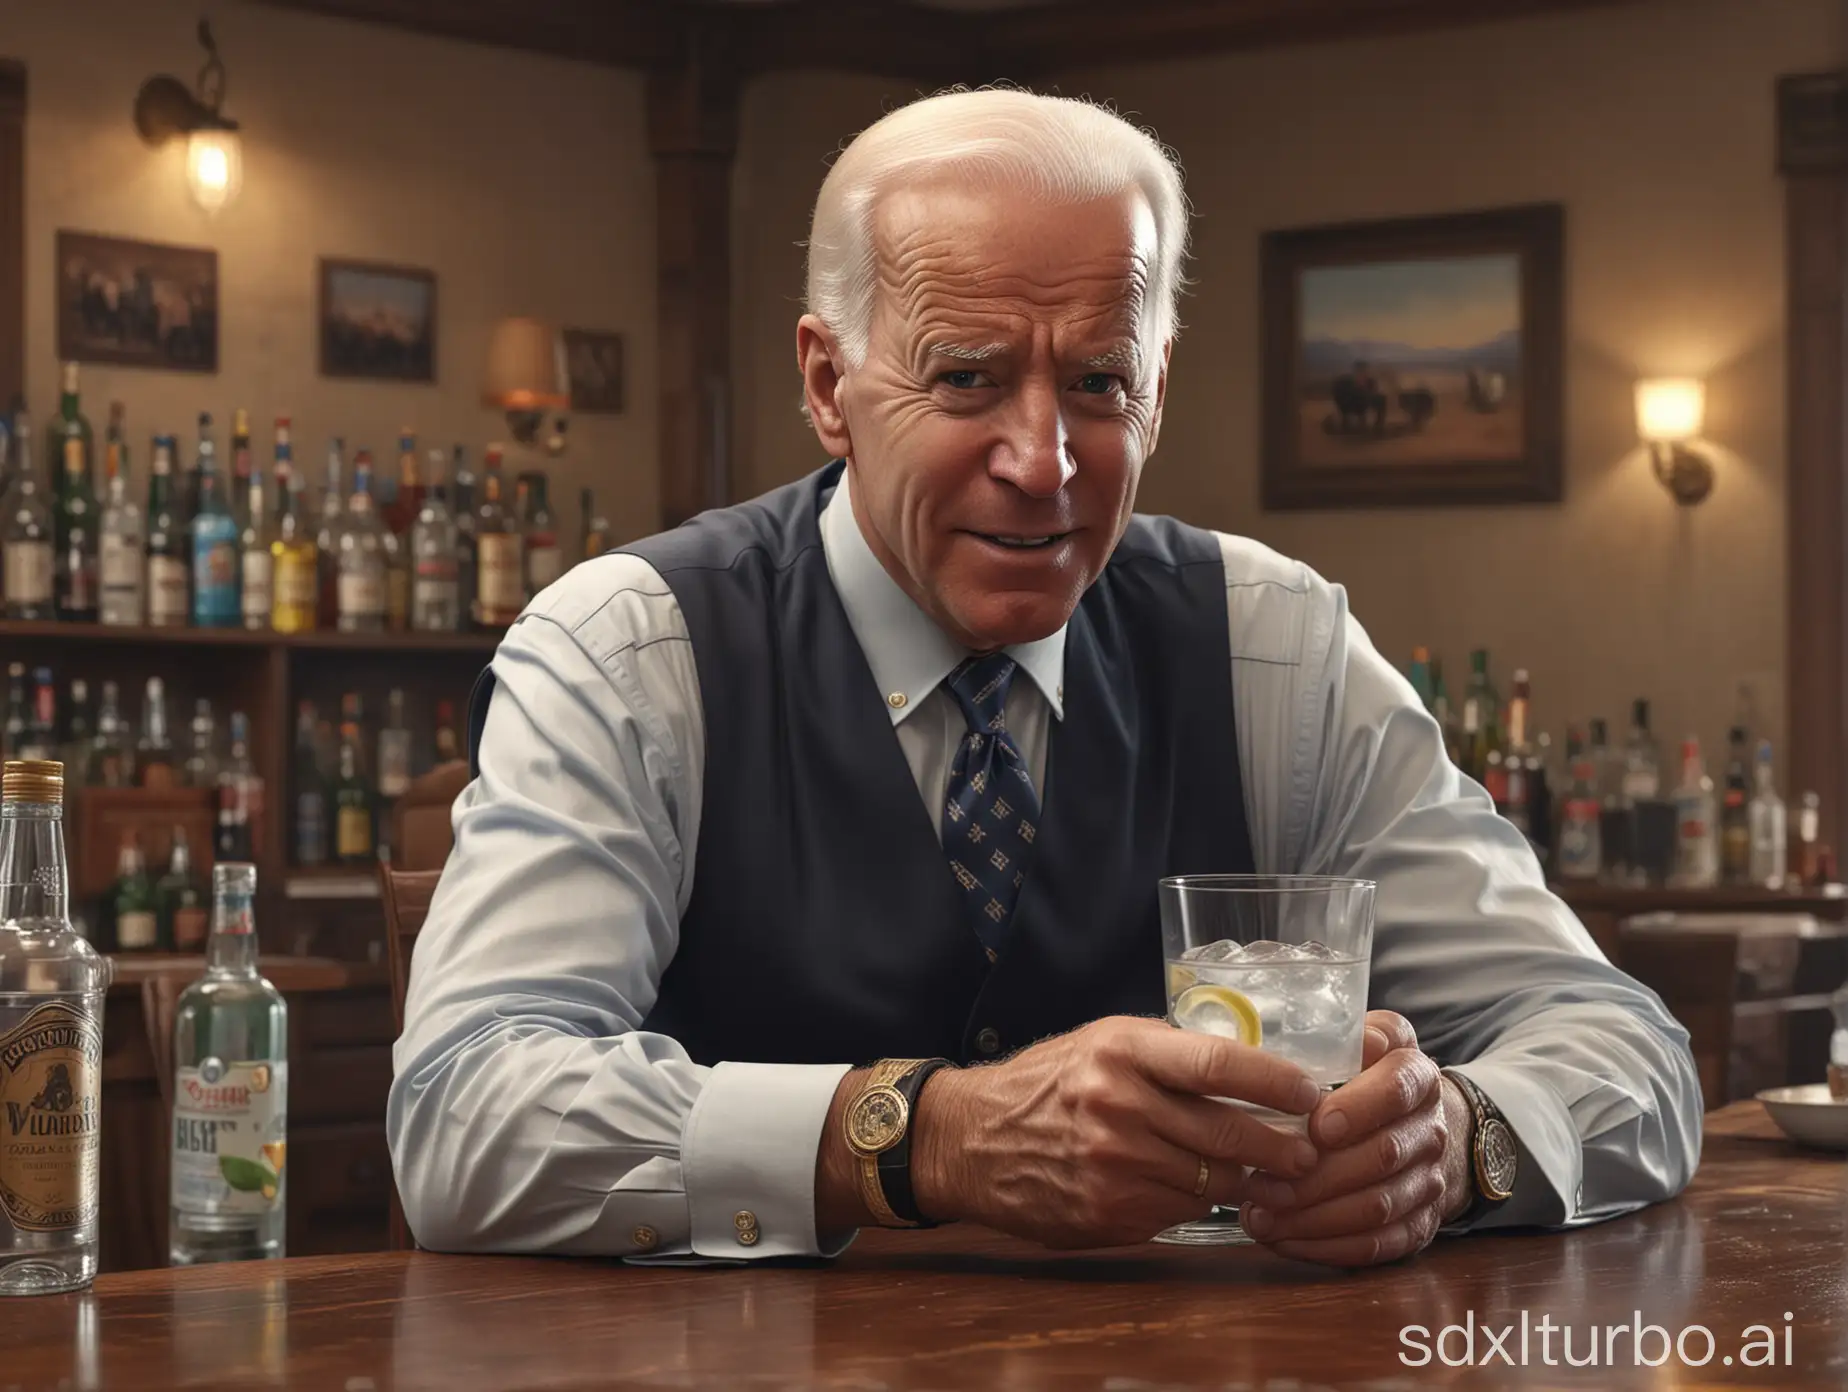 An extremely photo realistic image of Joe Biden HOLDING ONE GIN TONIC IN EACH HAND about to out drink his COMPETITION IN A WESTERN SHOOTOUT STYLE DRINK OFF under the table, Party, Western, Presidential, 8k, photorealistic, 